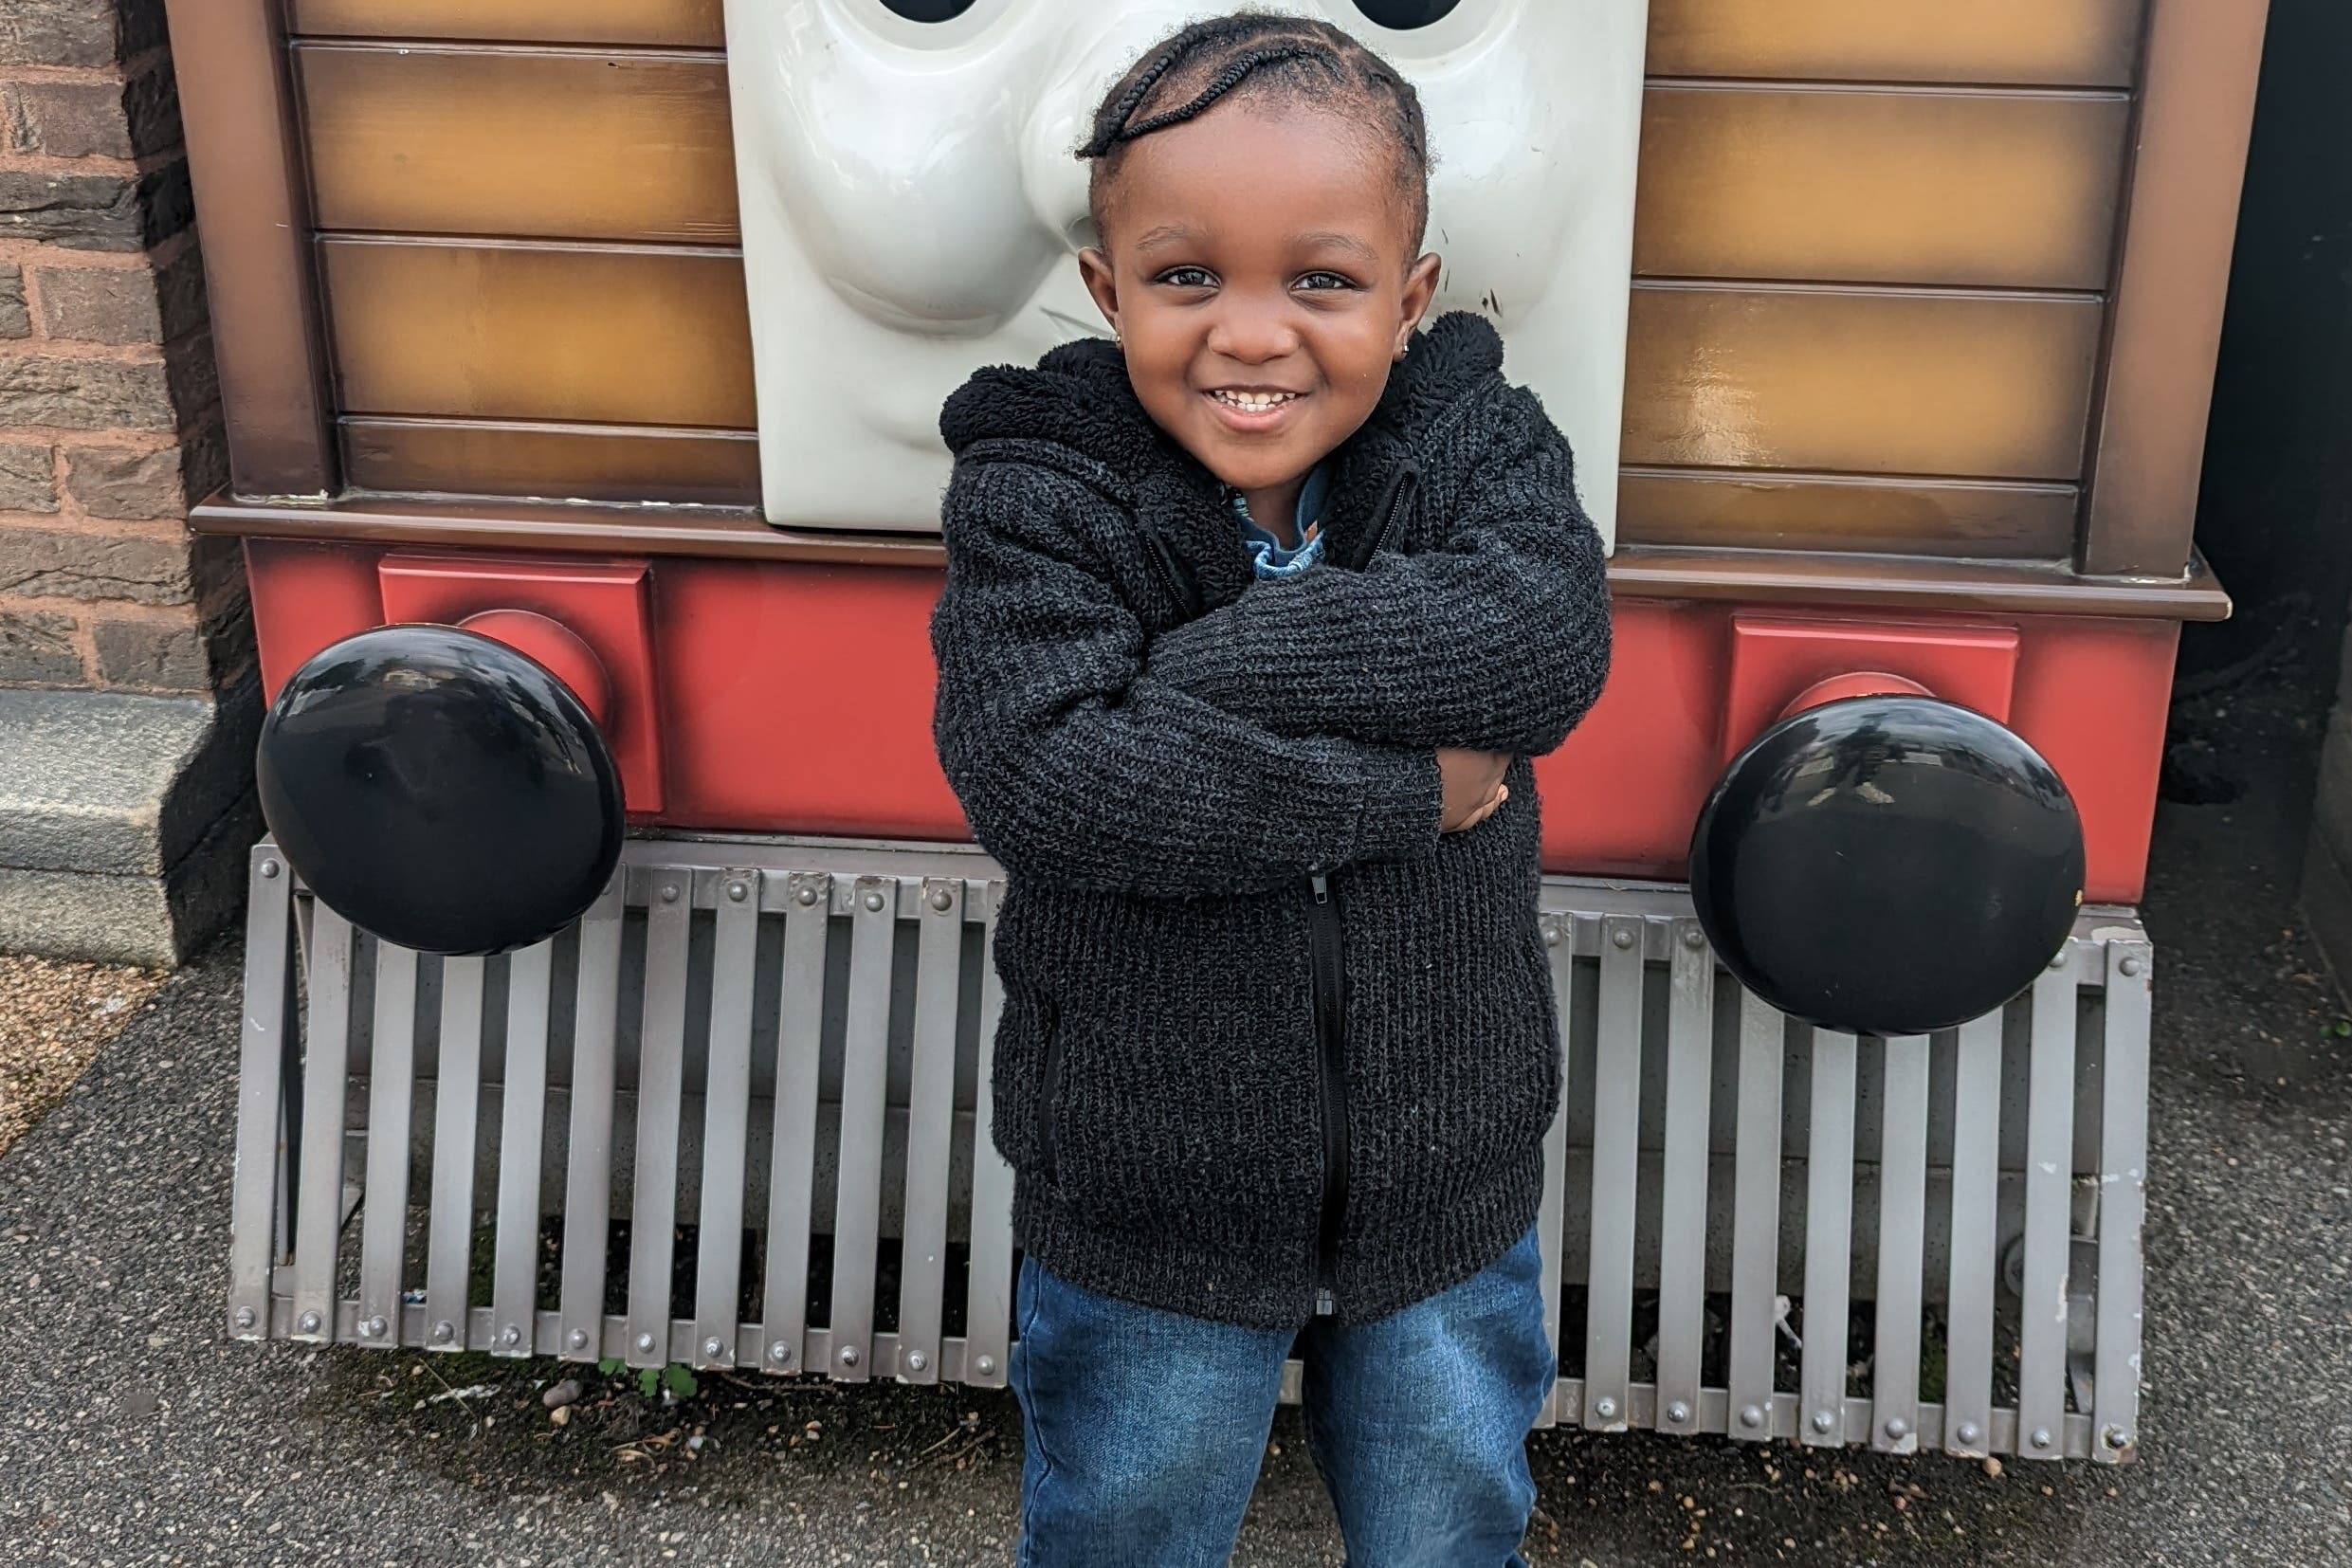 Dwelaniyah Robinson, three, who was murdered by his mother